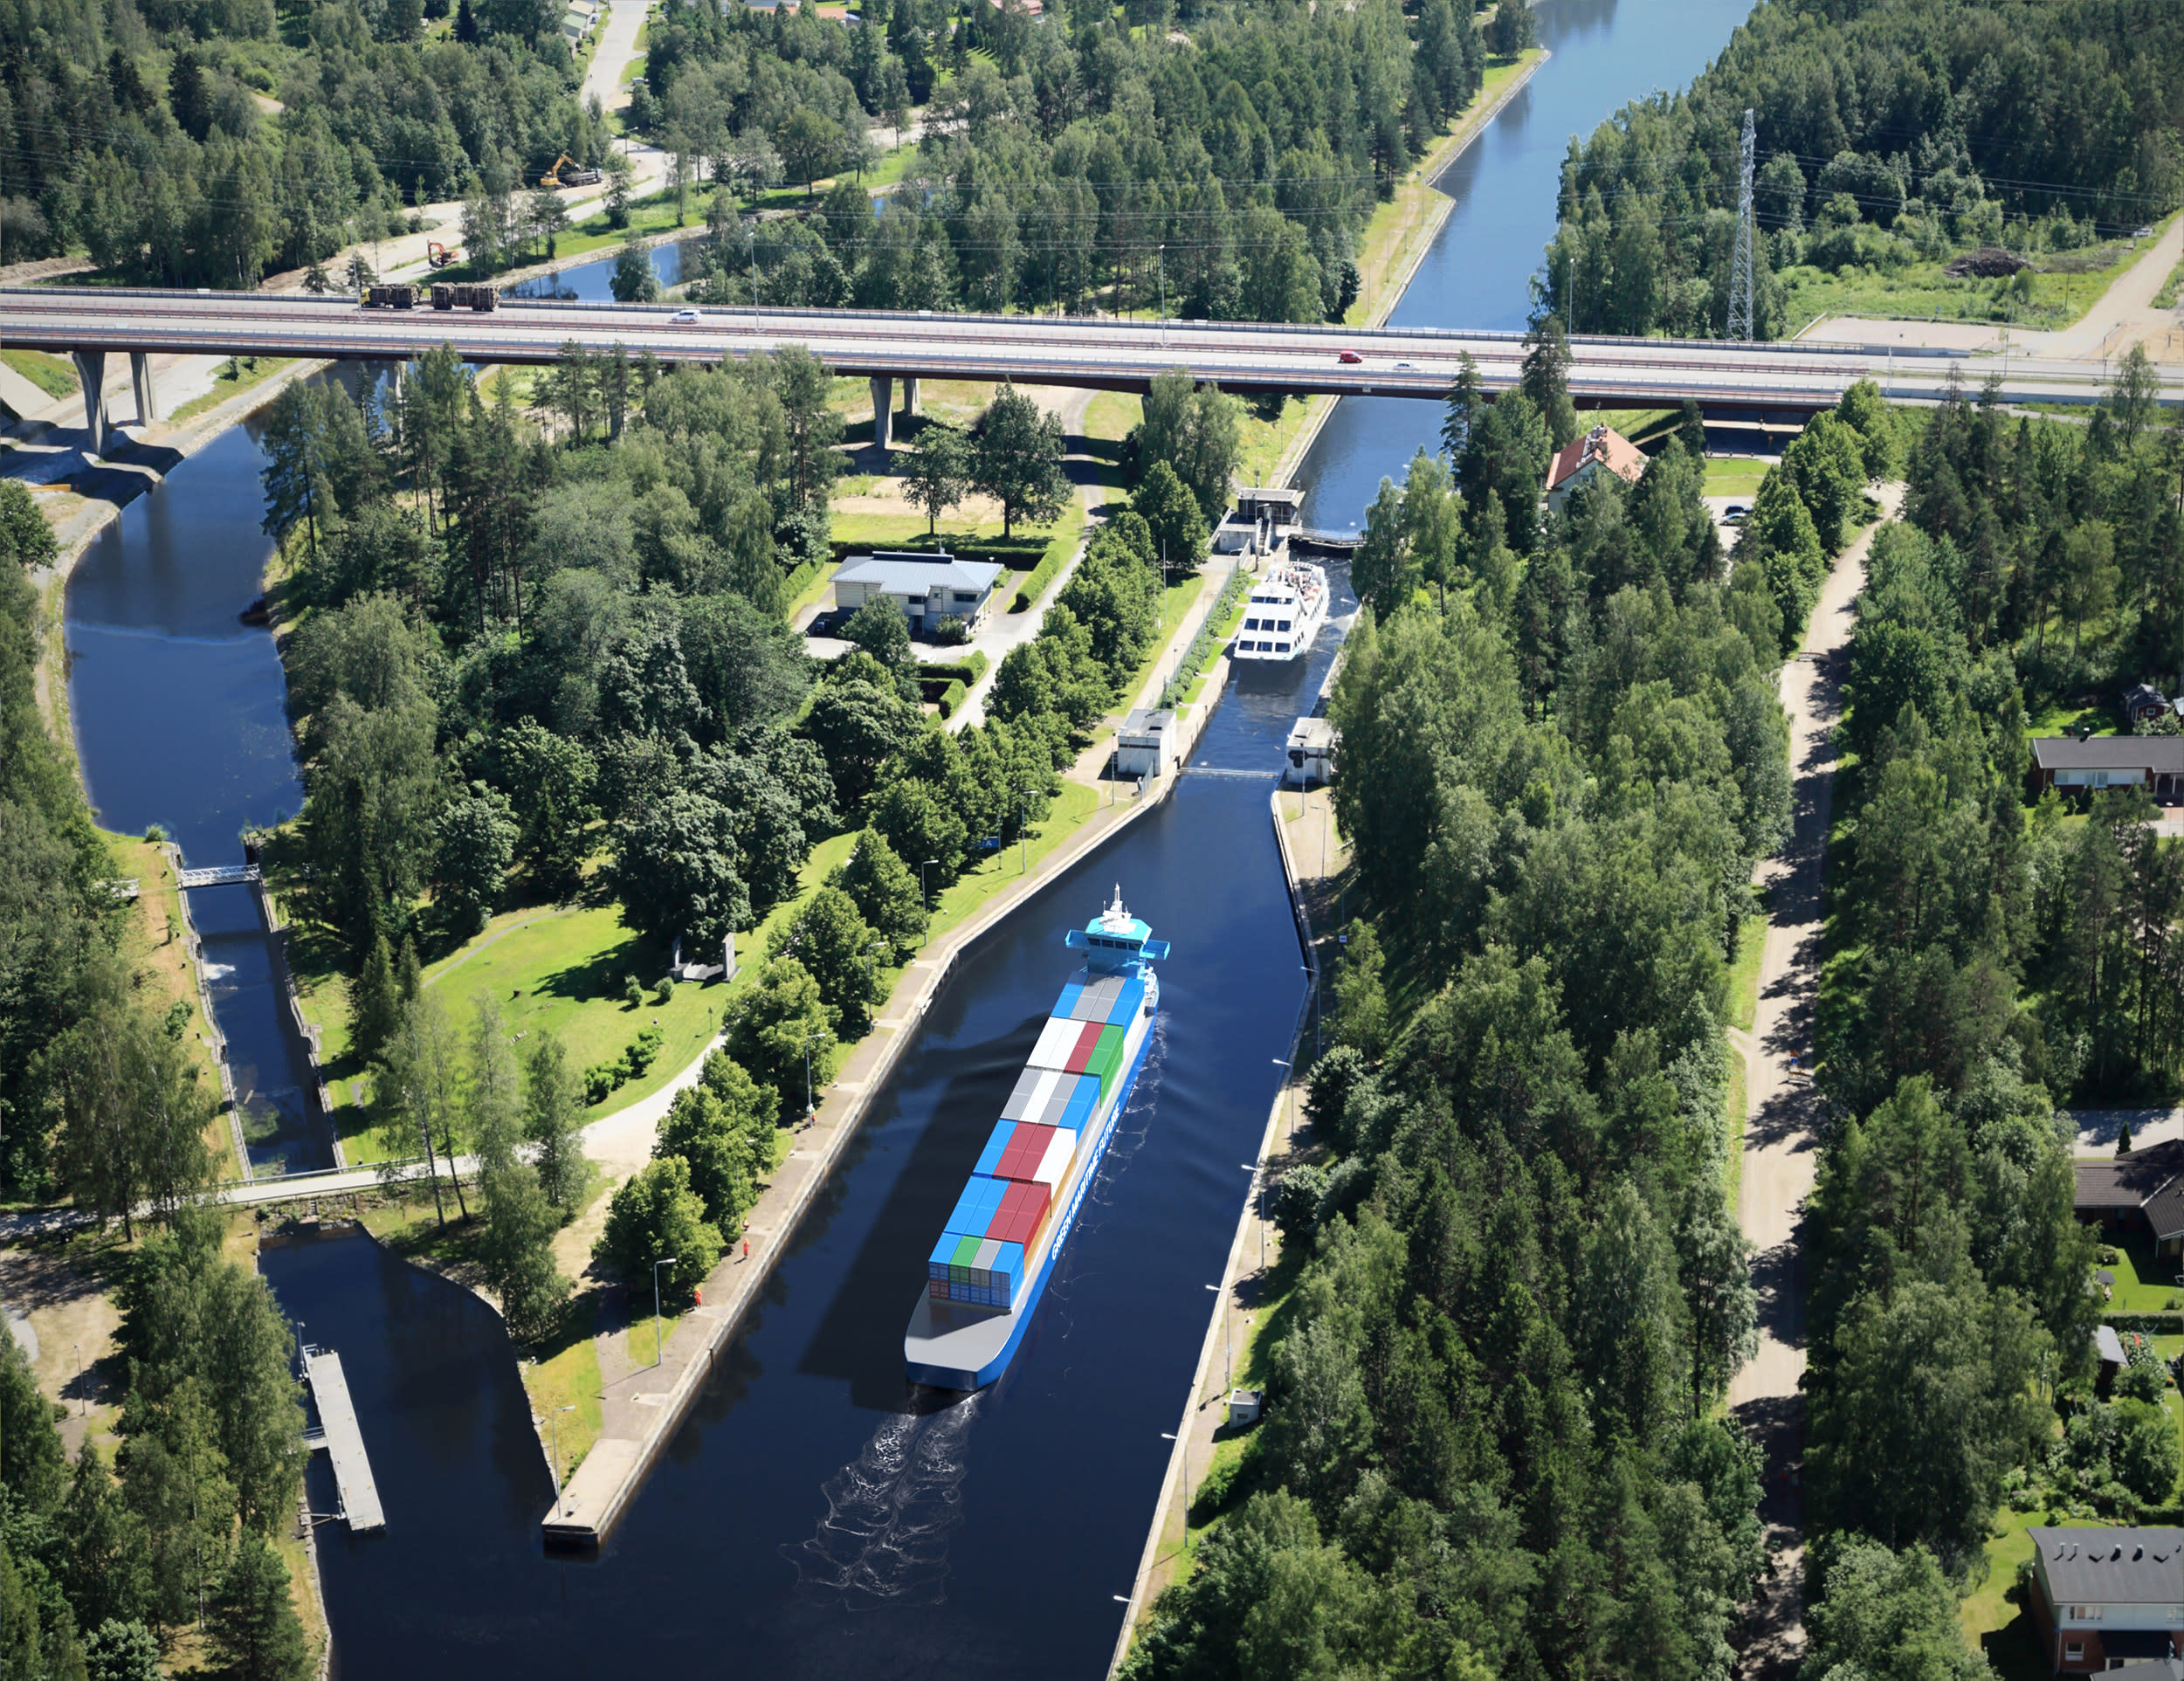 It has not yet been agreed to continue Russian timber transportation through the Saimaa canal